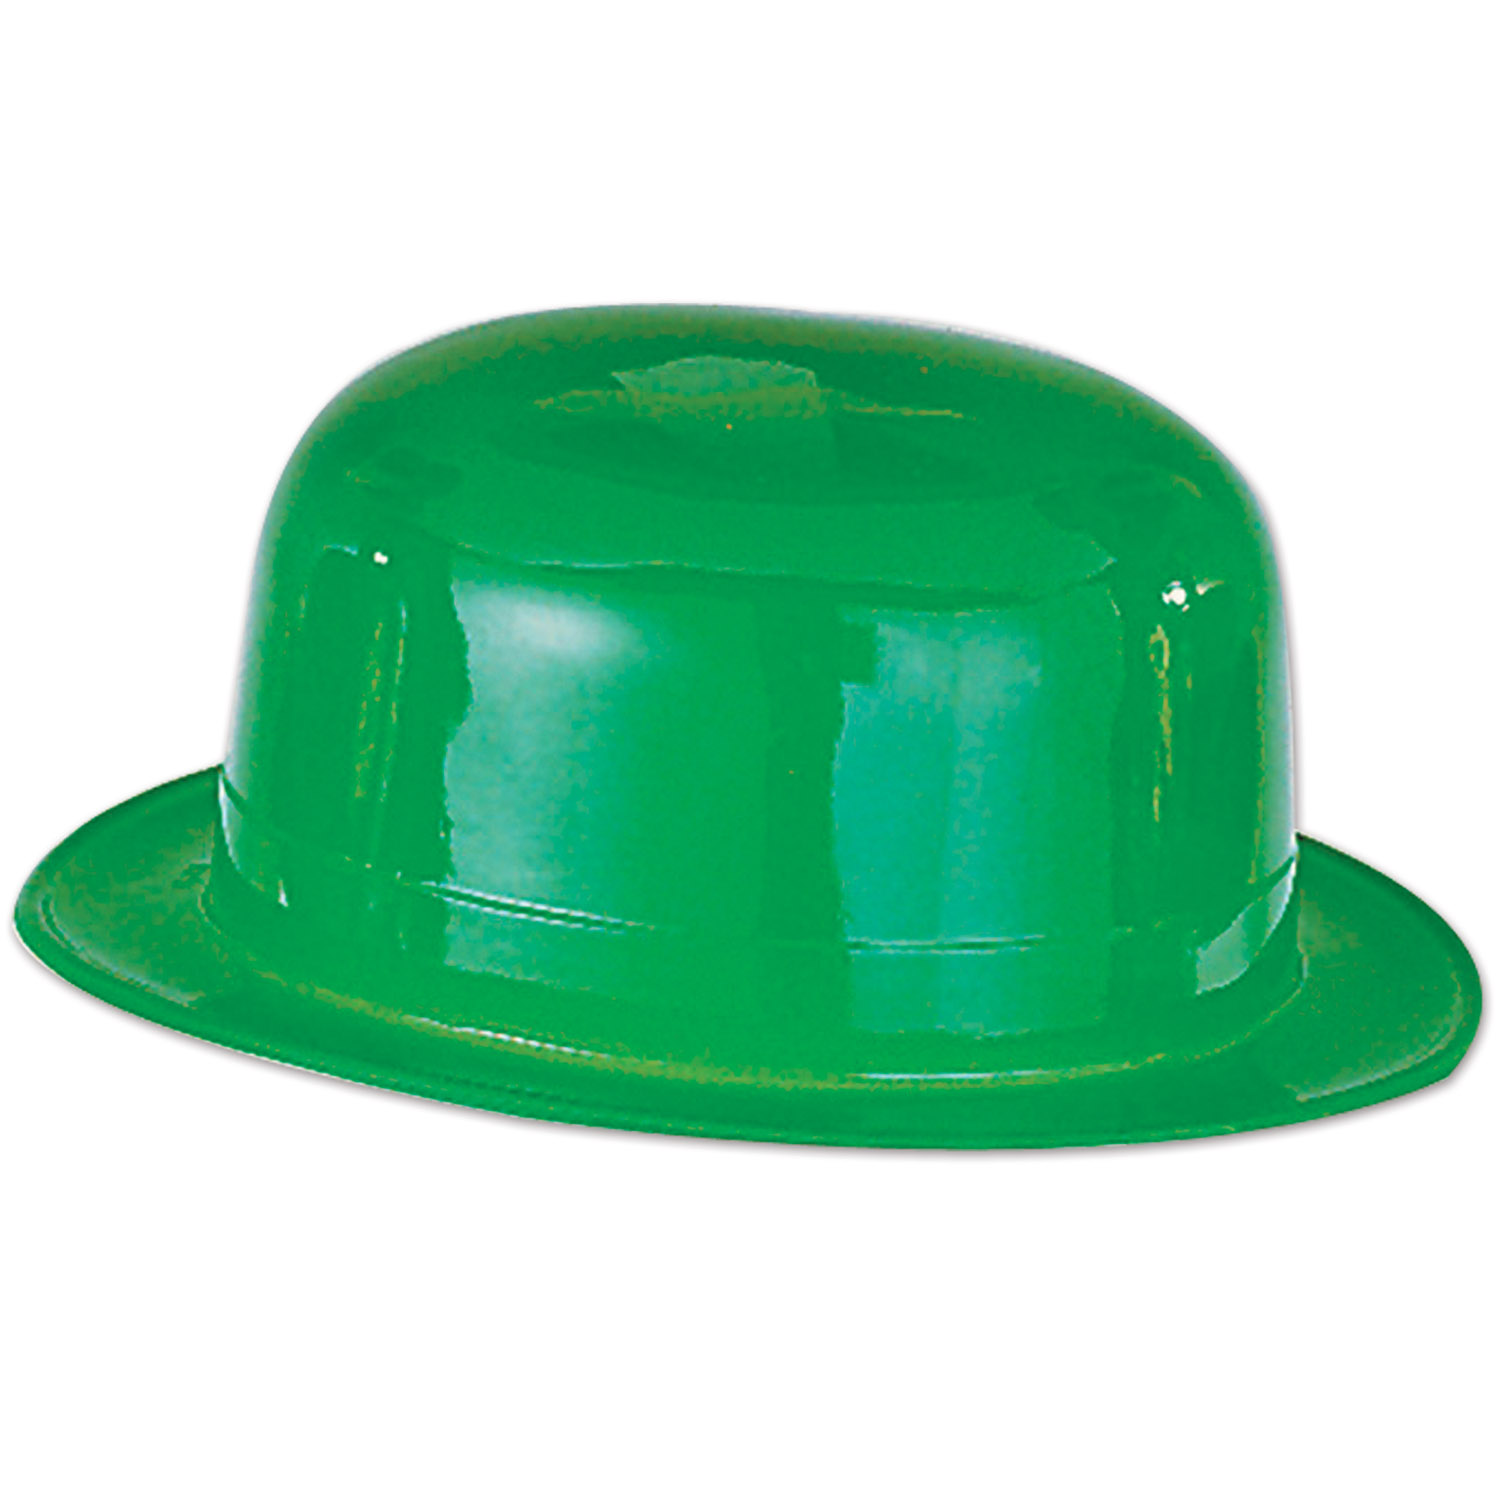 48 Pieces Green Plastic Derby One Size Fits Most - St. Patricks